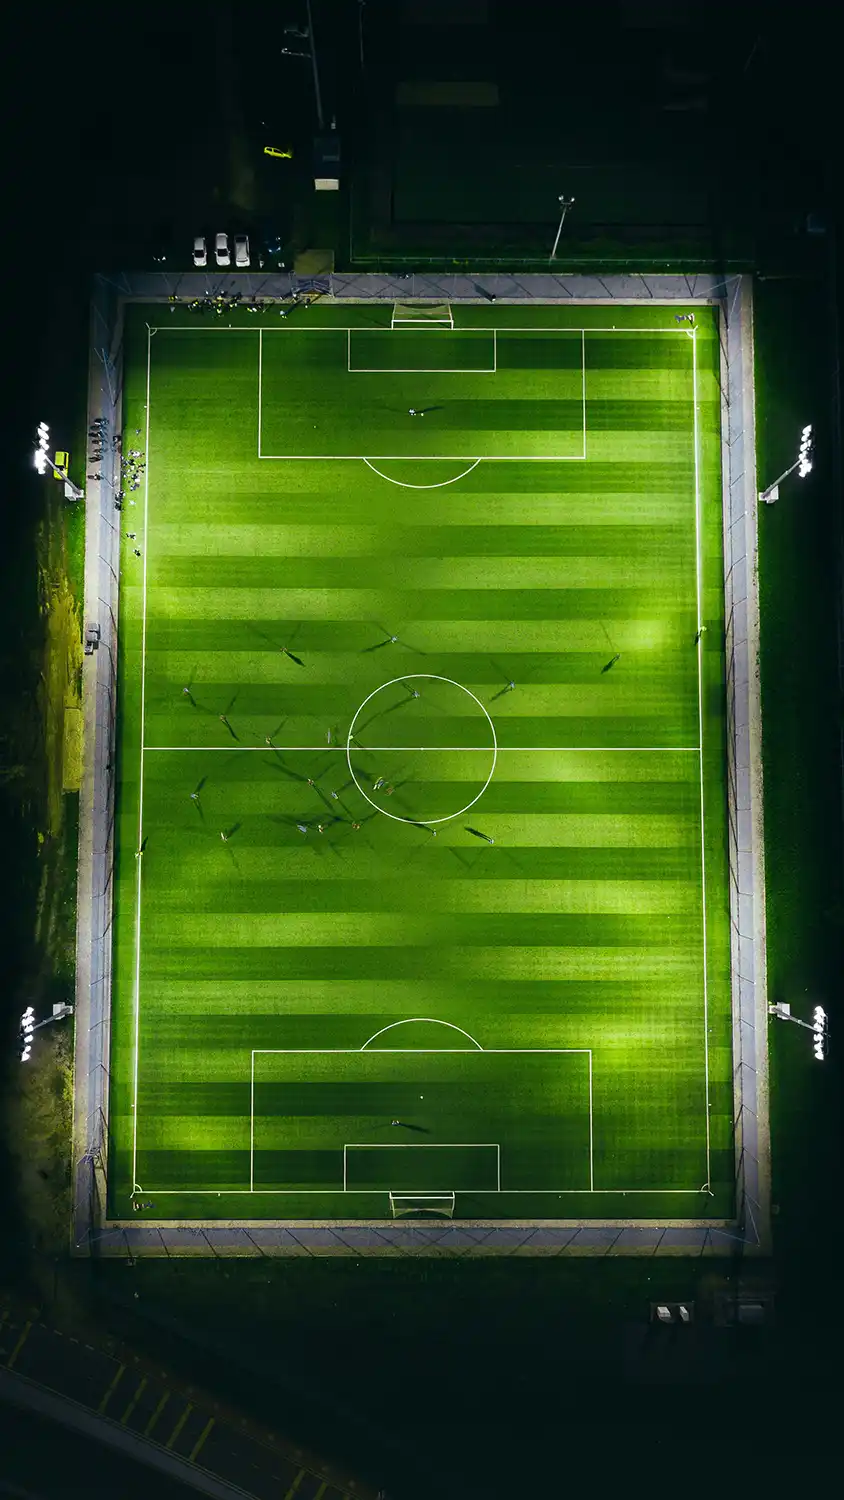 an overhead view of a football pitch at night